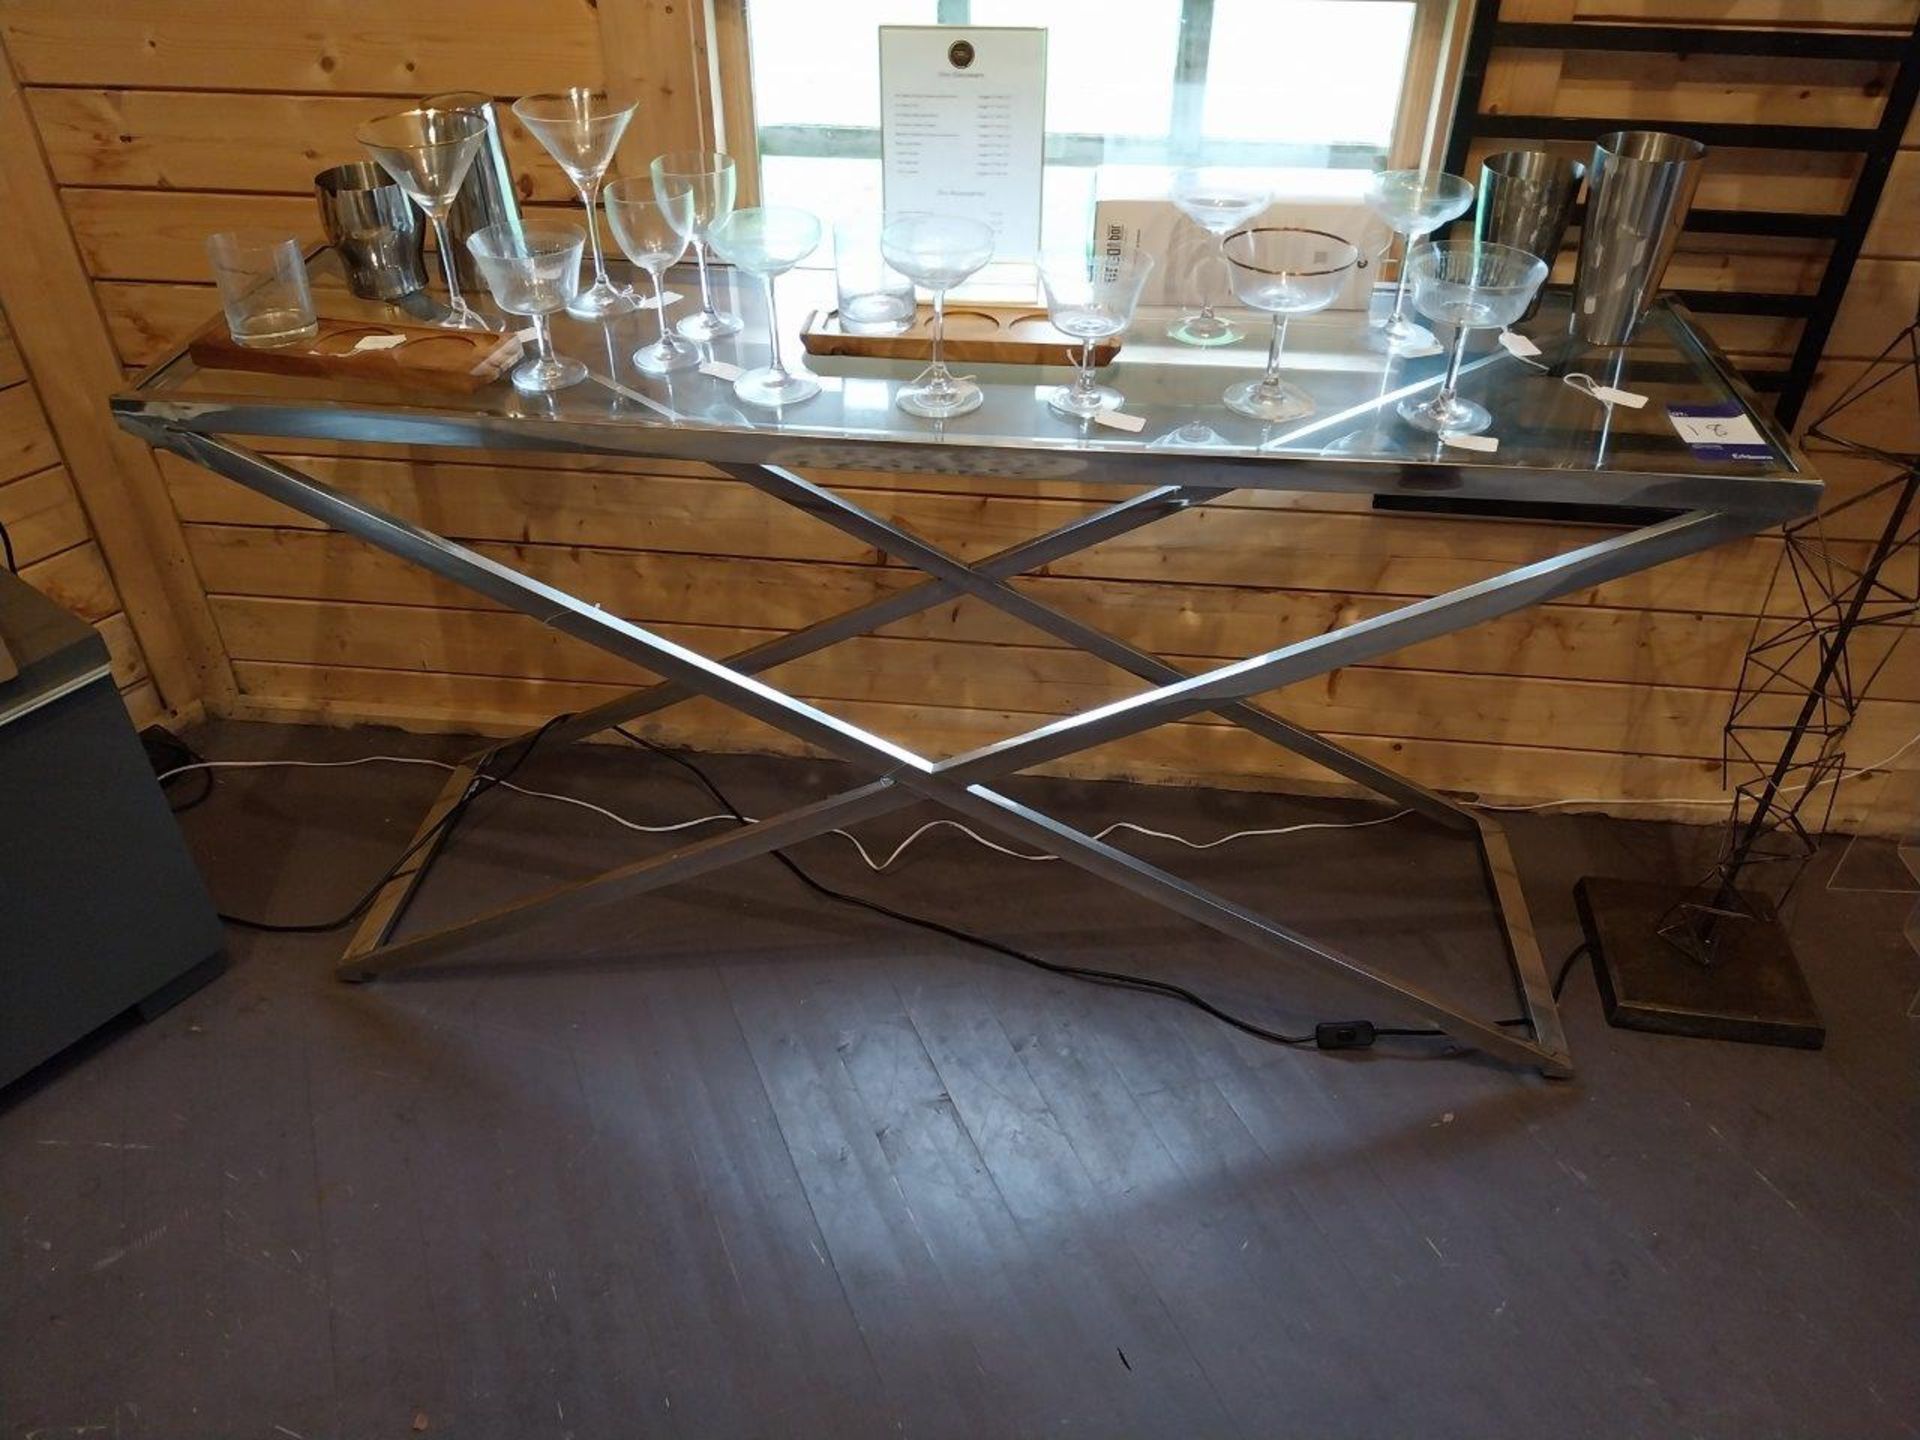 Chrome and Glass Topped Console Table, Floor Lamp and Quantity of Glasses - Image 2 of 3